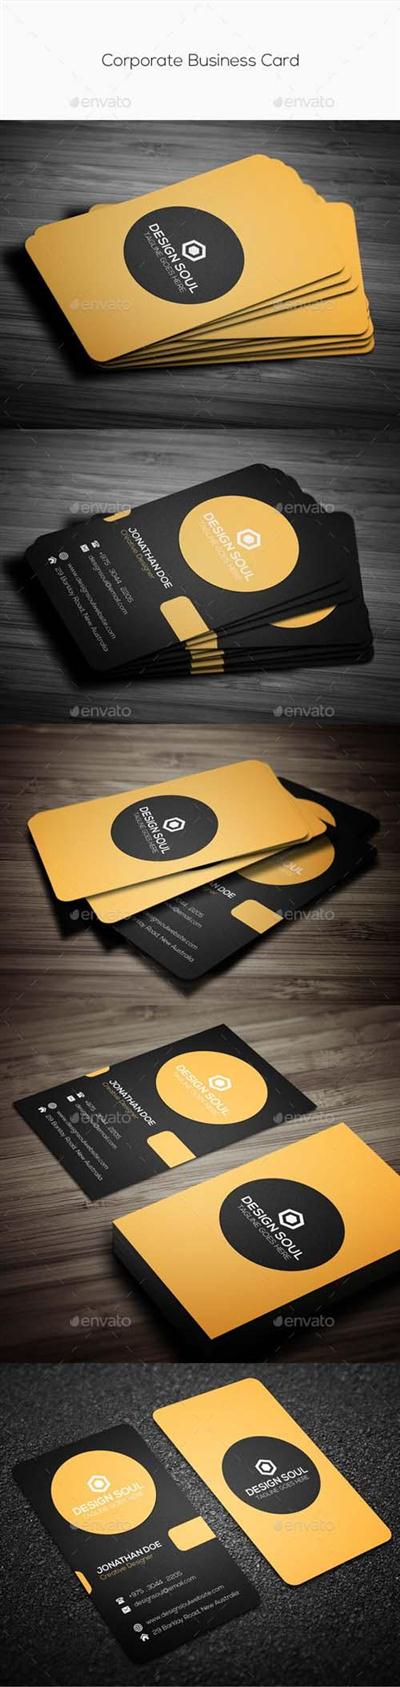 Corporate Business Card 10582257 | 1.23 MB